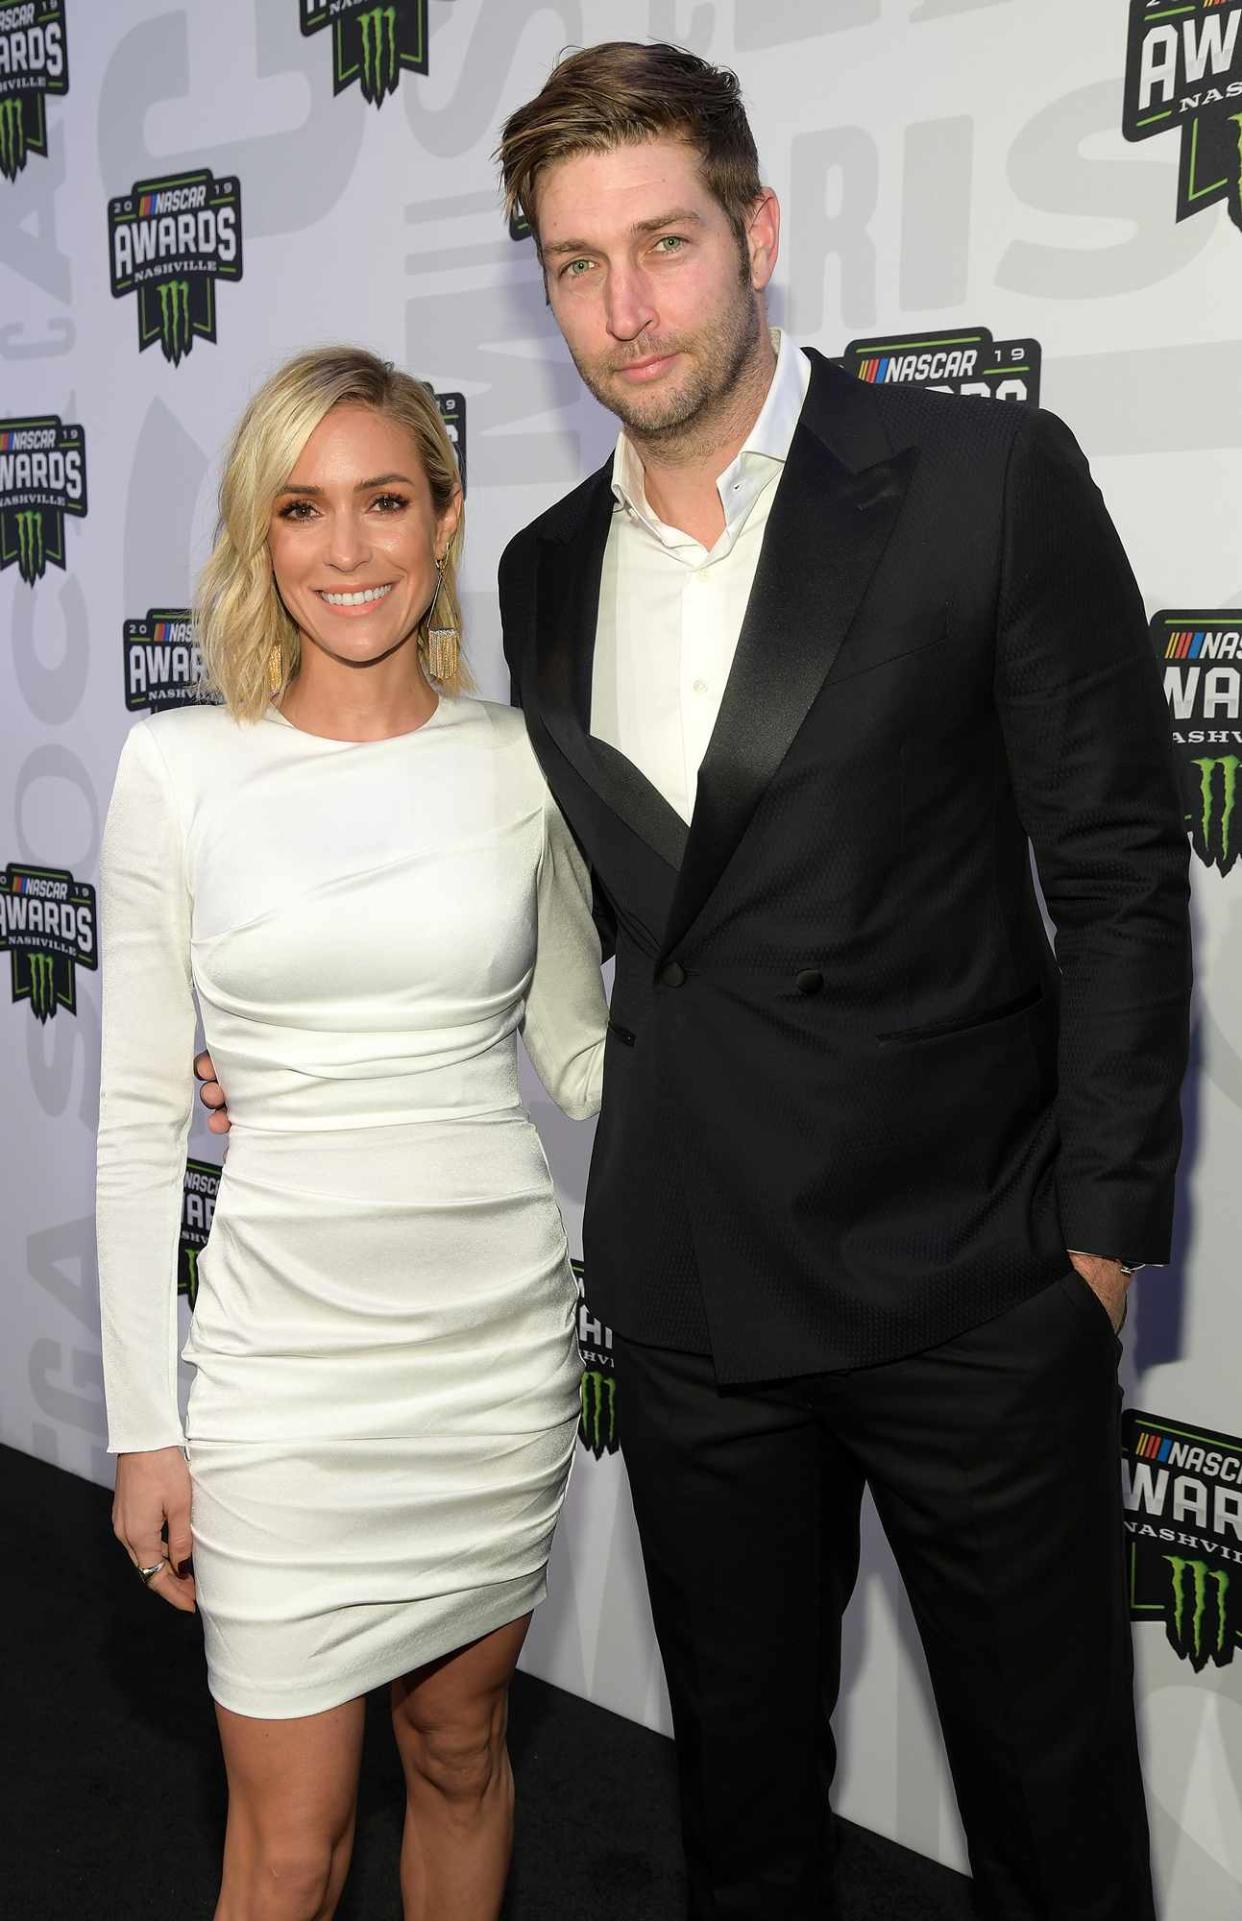 Jay Cutler and Kristin Cavallari attend the Monster Energy NASCAR Cup Series Awards at Music City Center on December 05, 2019 in Nashville, Tennessee